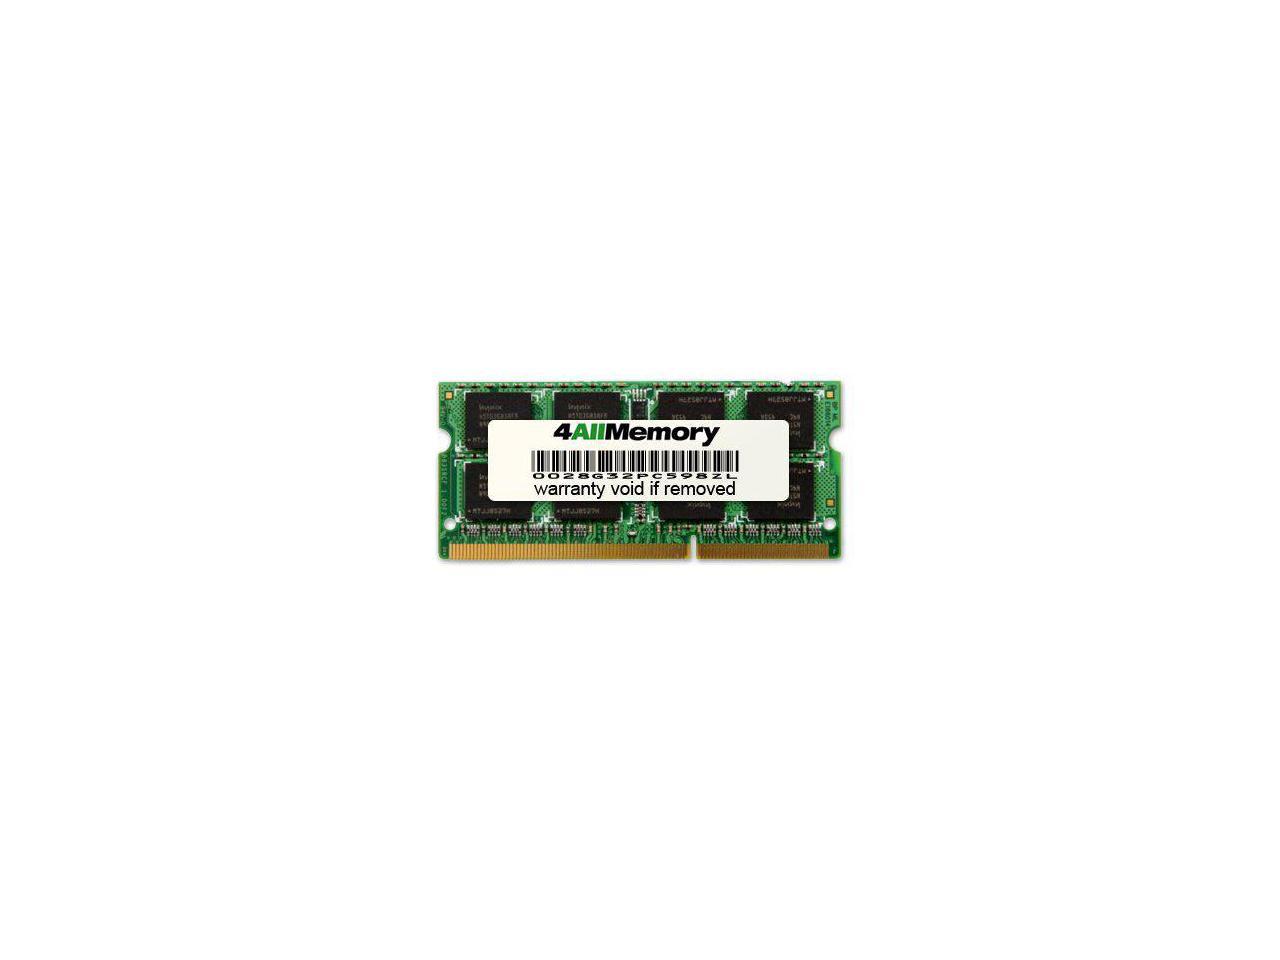 RAM Memory Upgrade for The Acer TravelMate TM5760-2314G75Mnsk 4GB DDR3-1066 PC3-8500 